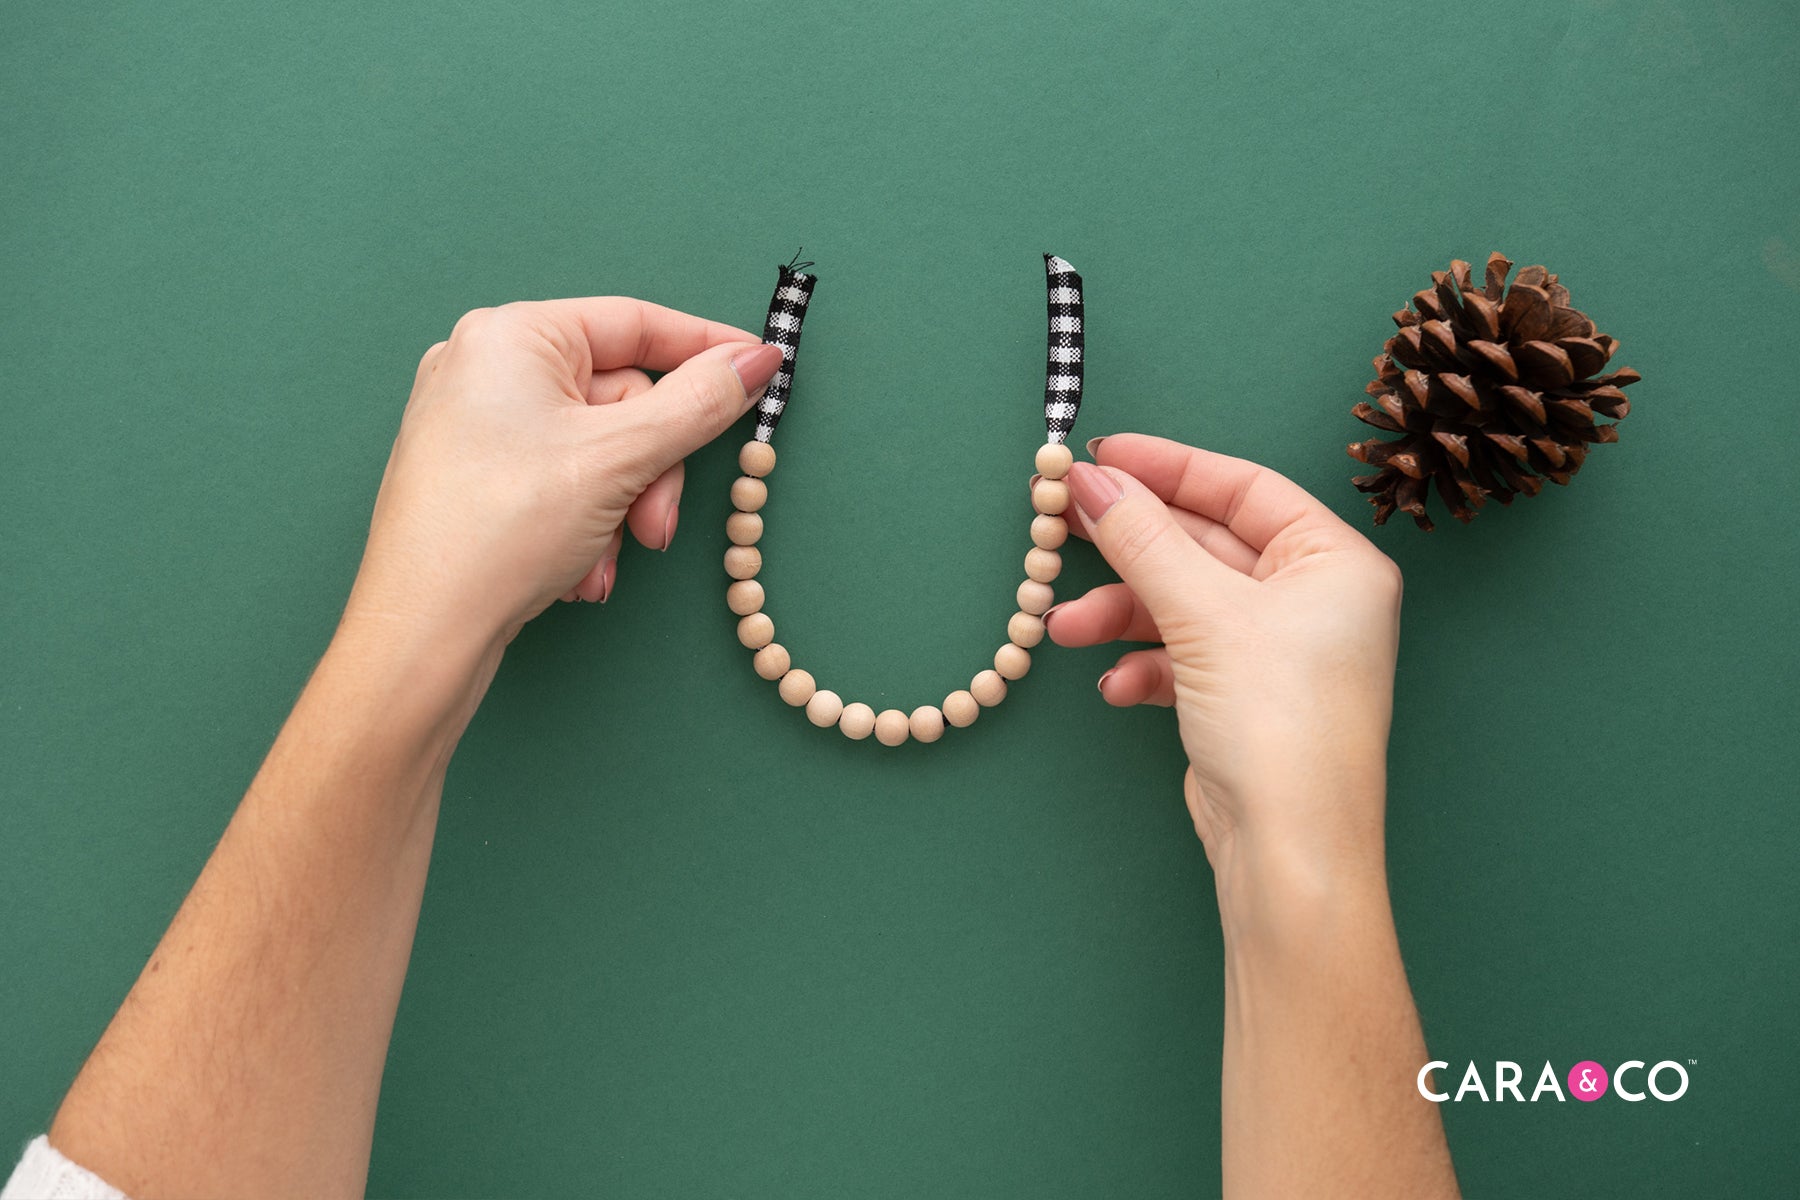 Thread Wooden Beads - Step-by-Step Tutorial - Cara & Co